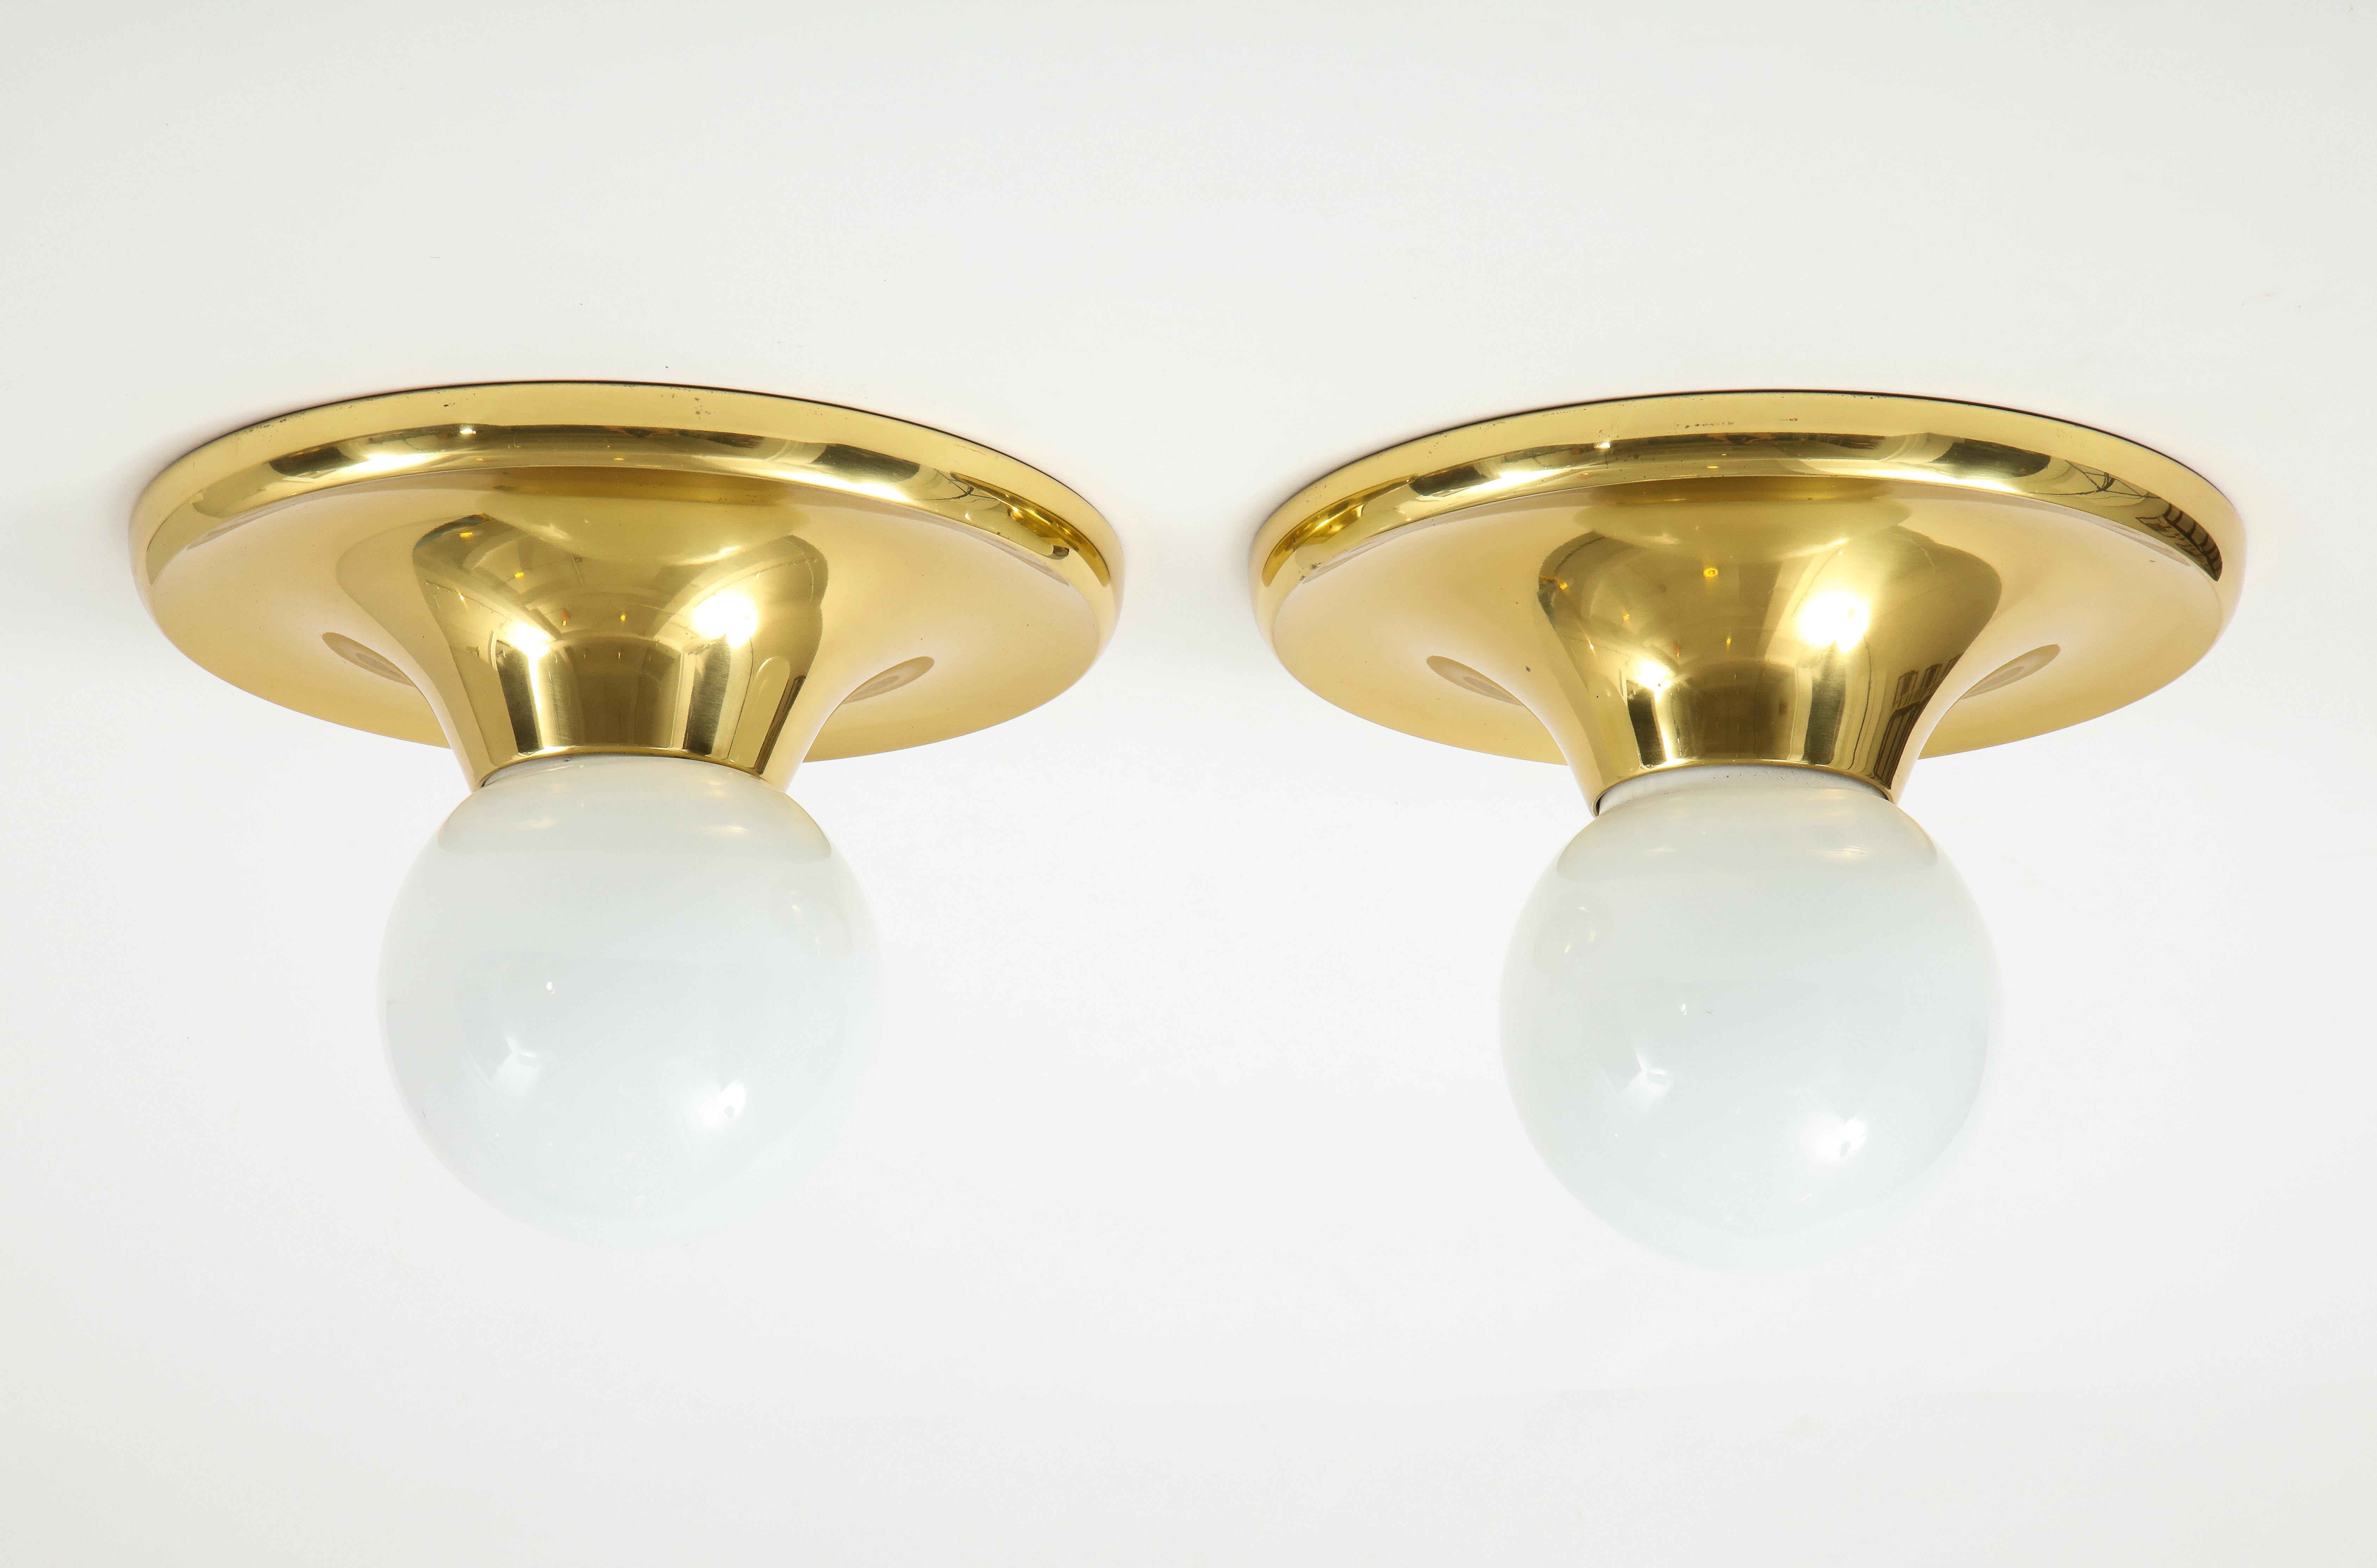 Stunning pair of 1970s large brass sconces designed by Archille Castiglioni for Arteluce. In vintage original condition with minor wear and patina.